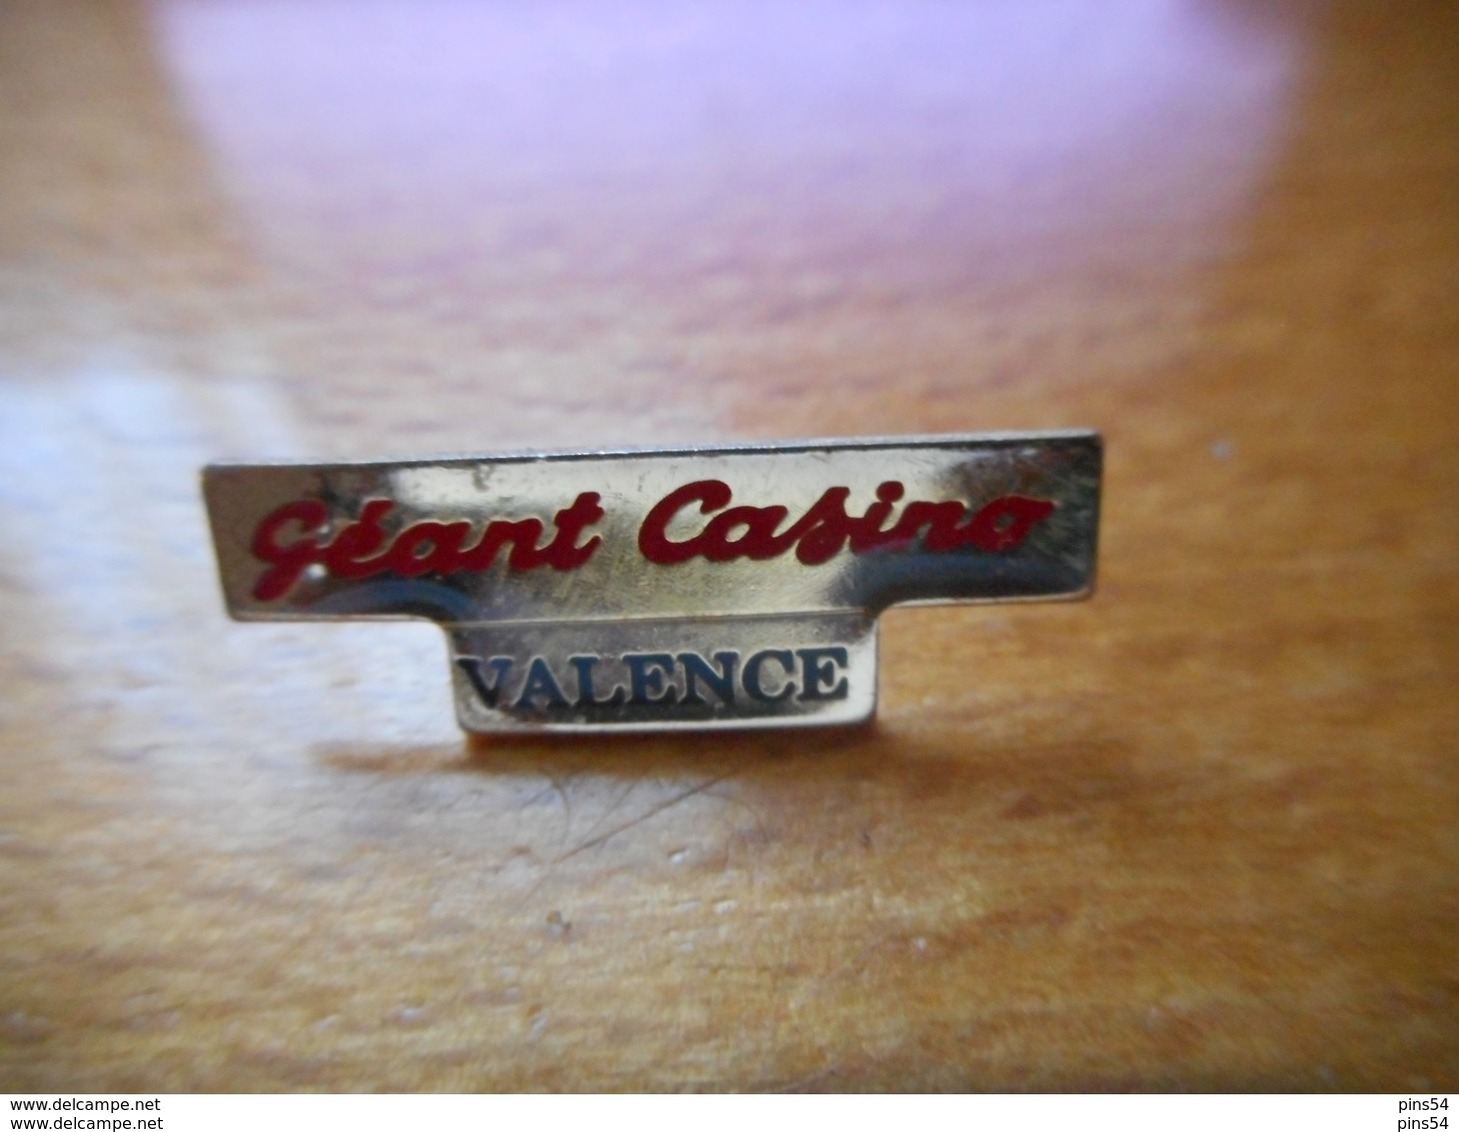 A017 -- Pin's Géant Casino Valence - Marques